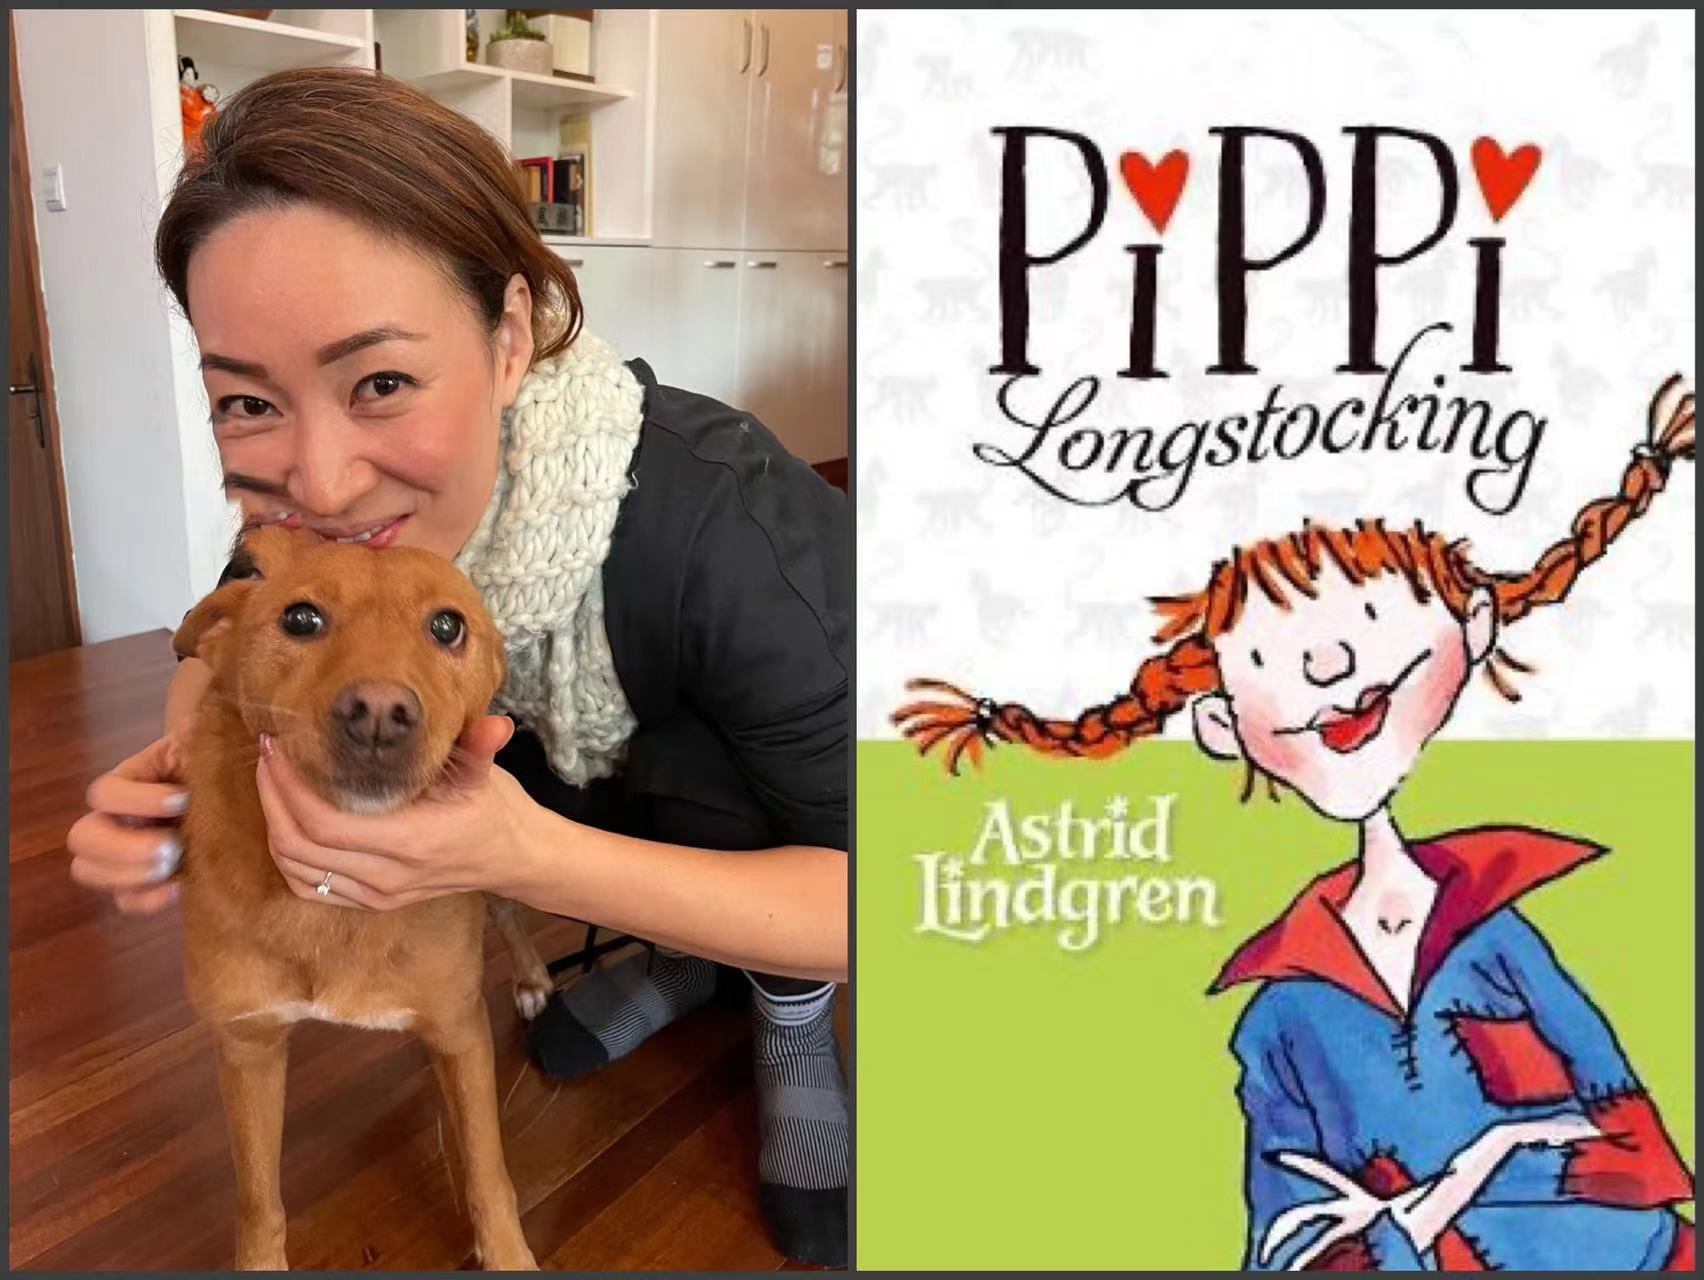 Kim YoungAh: Her dog Pippi (named after Pippi Longstocking) joined us for the recording, and she was silent during the interview except for the sound of her claws on the wooden flooring.